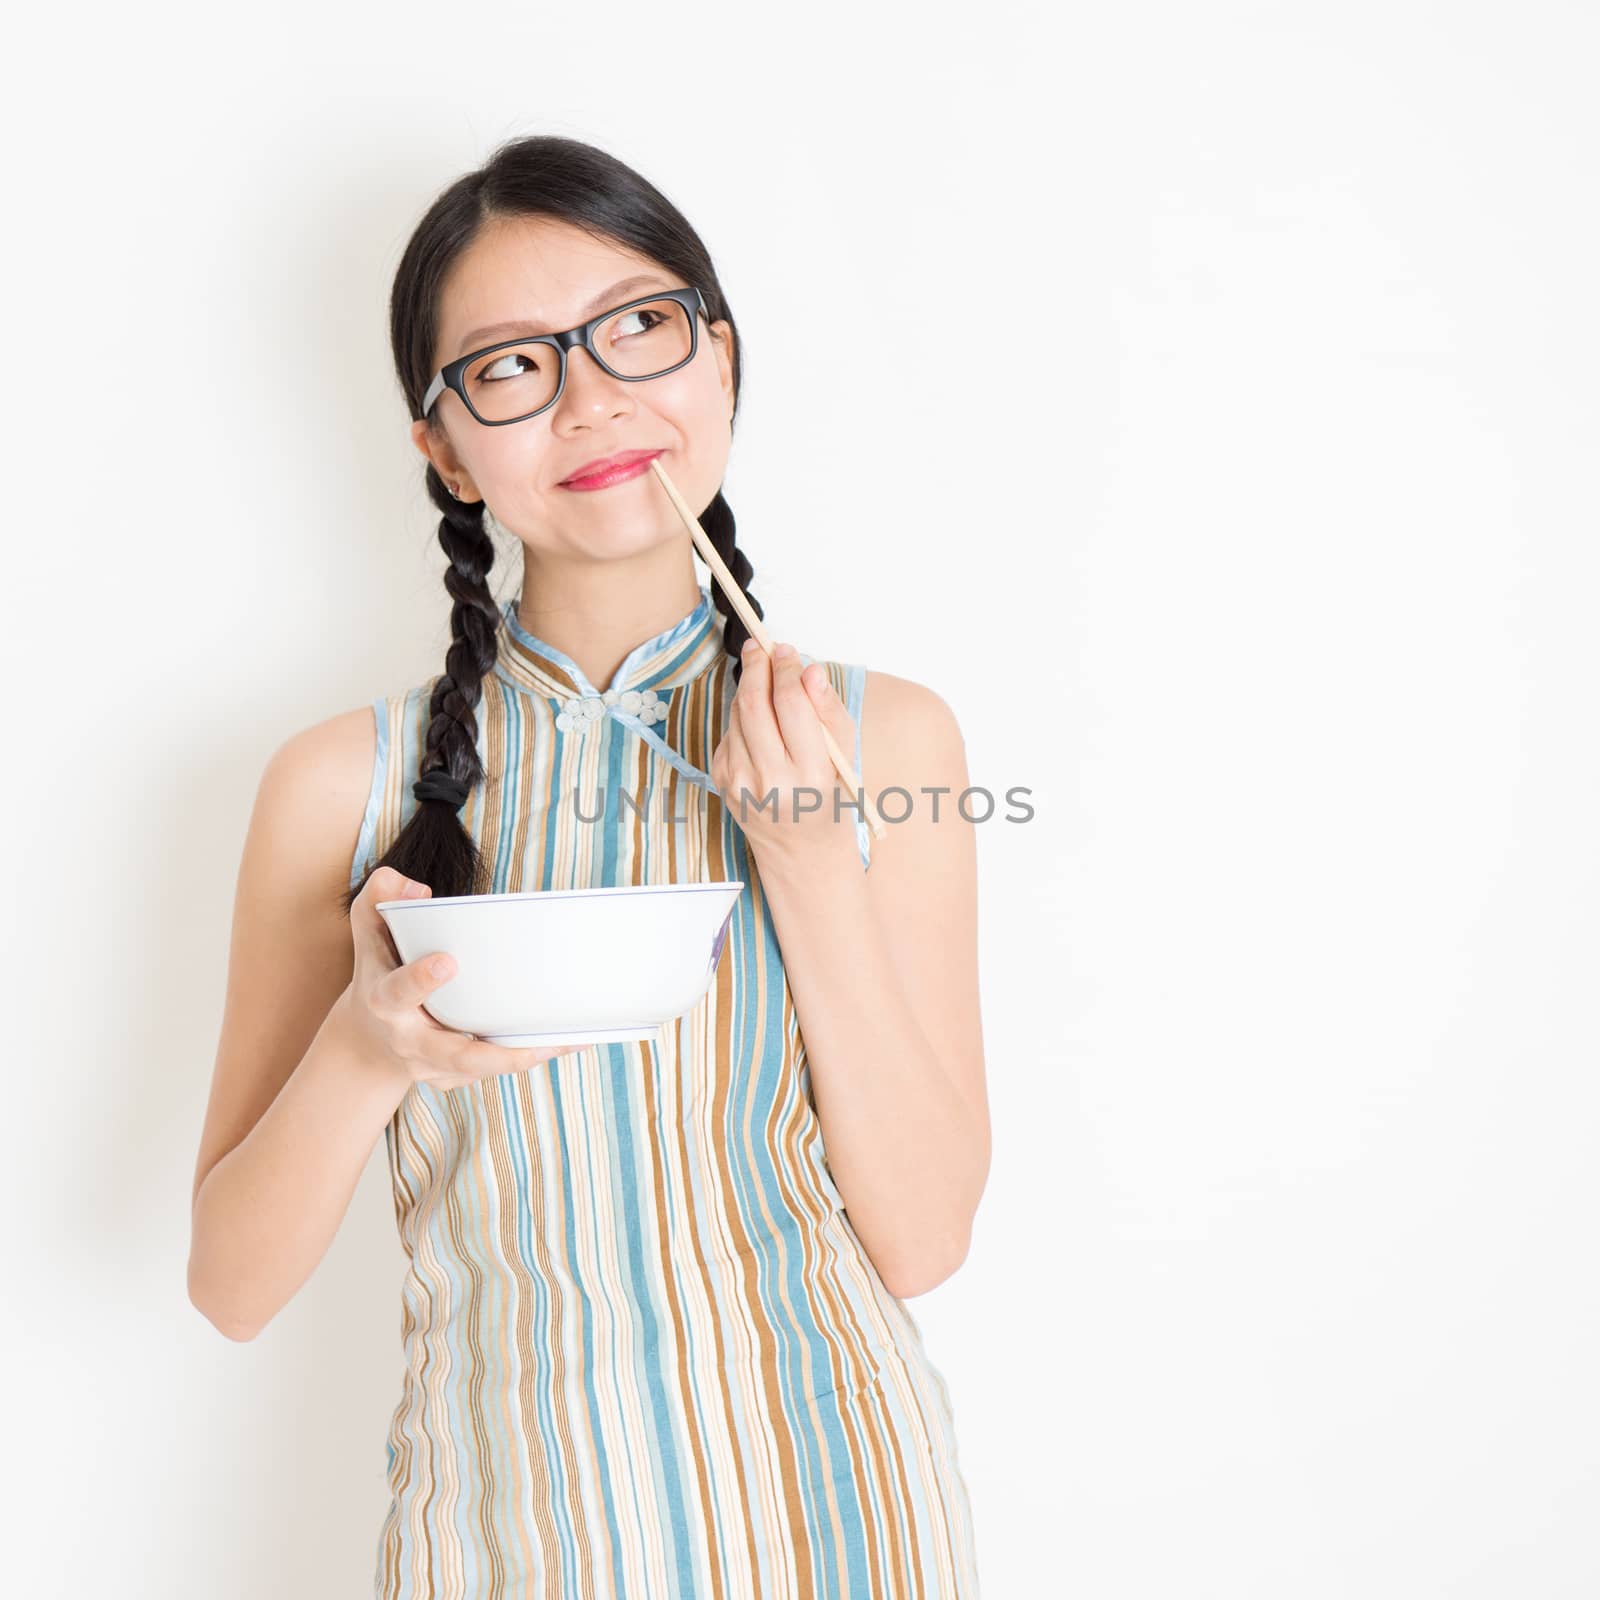 Portrait of young Asian woman in traditional qipao dress eating with chopsticks, celebrating Chinese Lunar New Year or spring festival, standing on plain background.